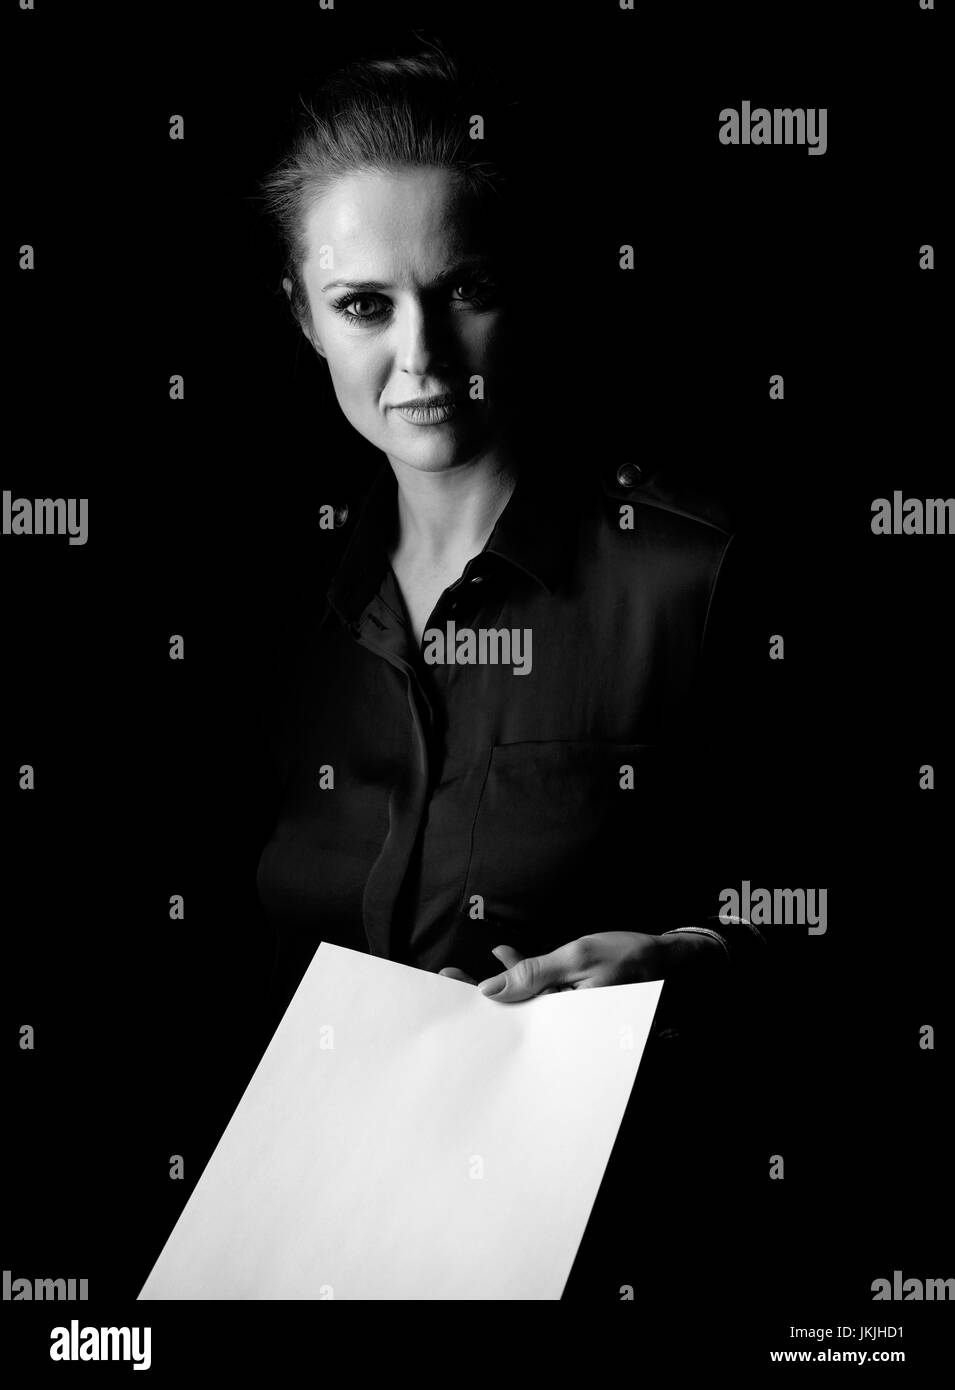 Сoming out into the light. Portrait of woman in the dark dress isolated on black giving paper sheet Stock Photo